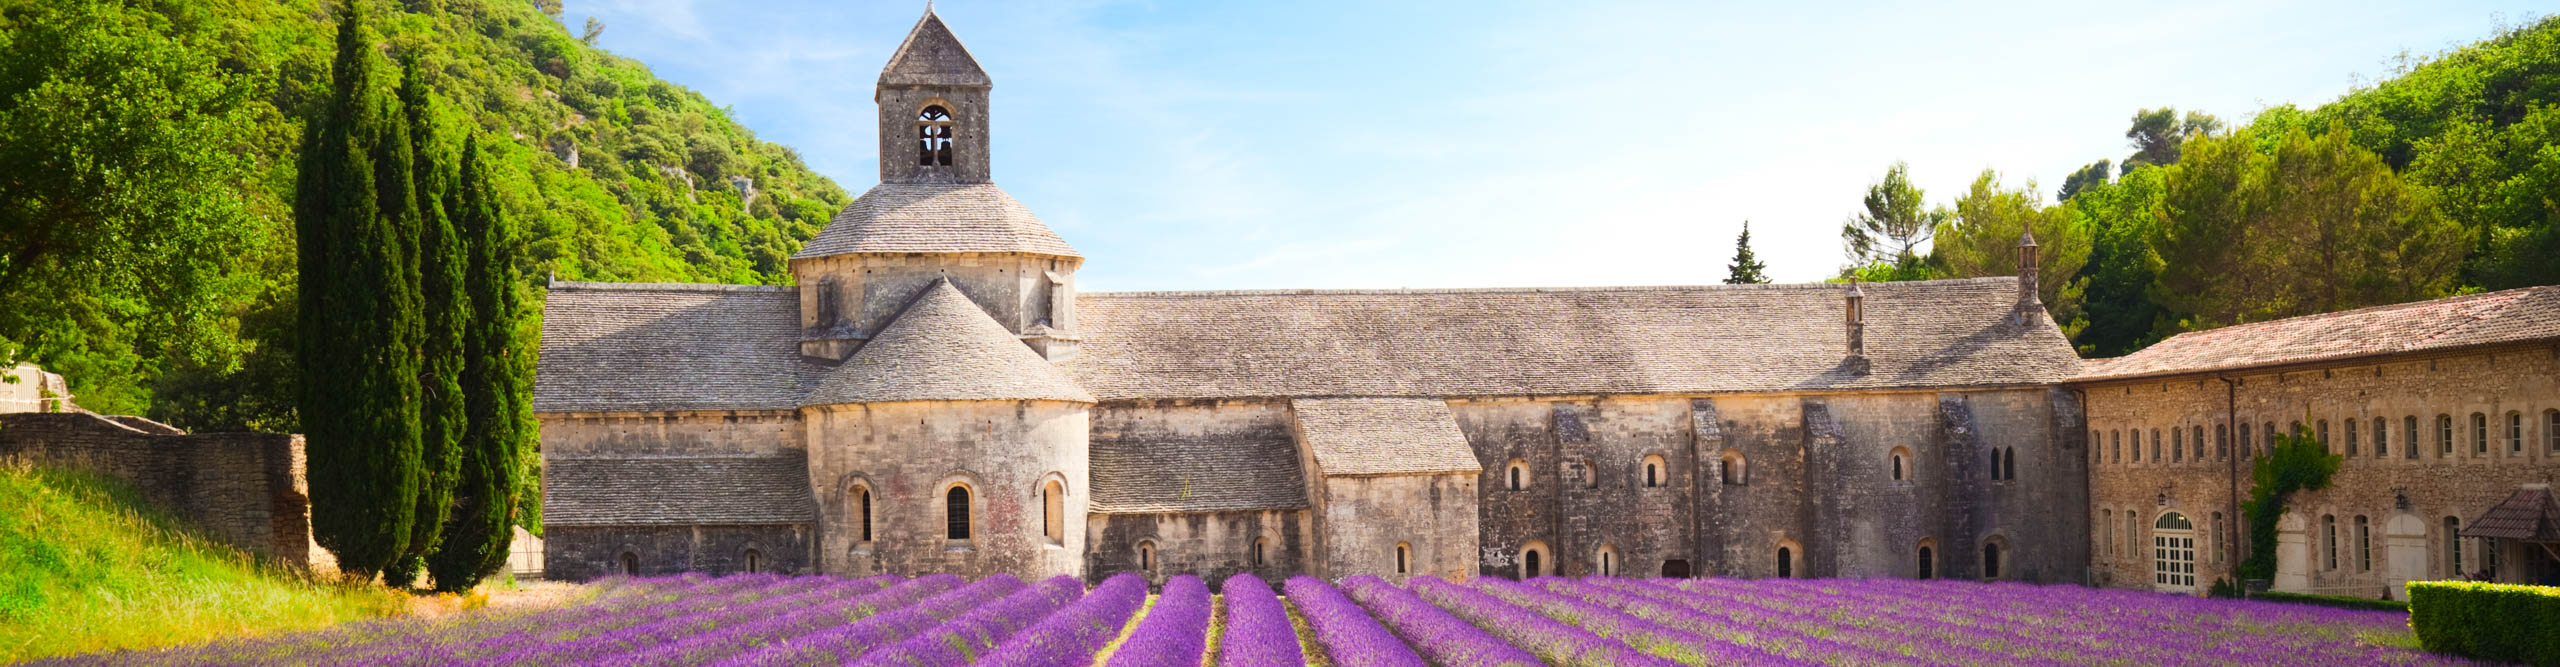 Senanque Abbey with blooming lavender field in Provence on a sunny day with blue skies